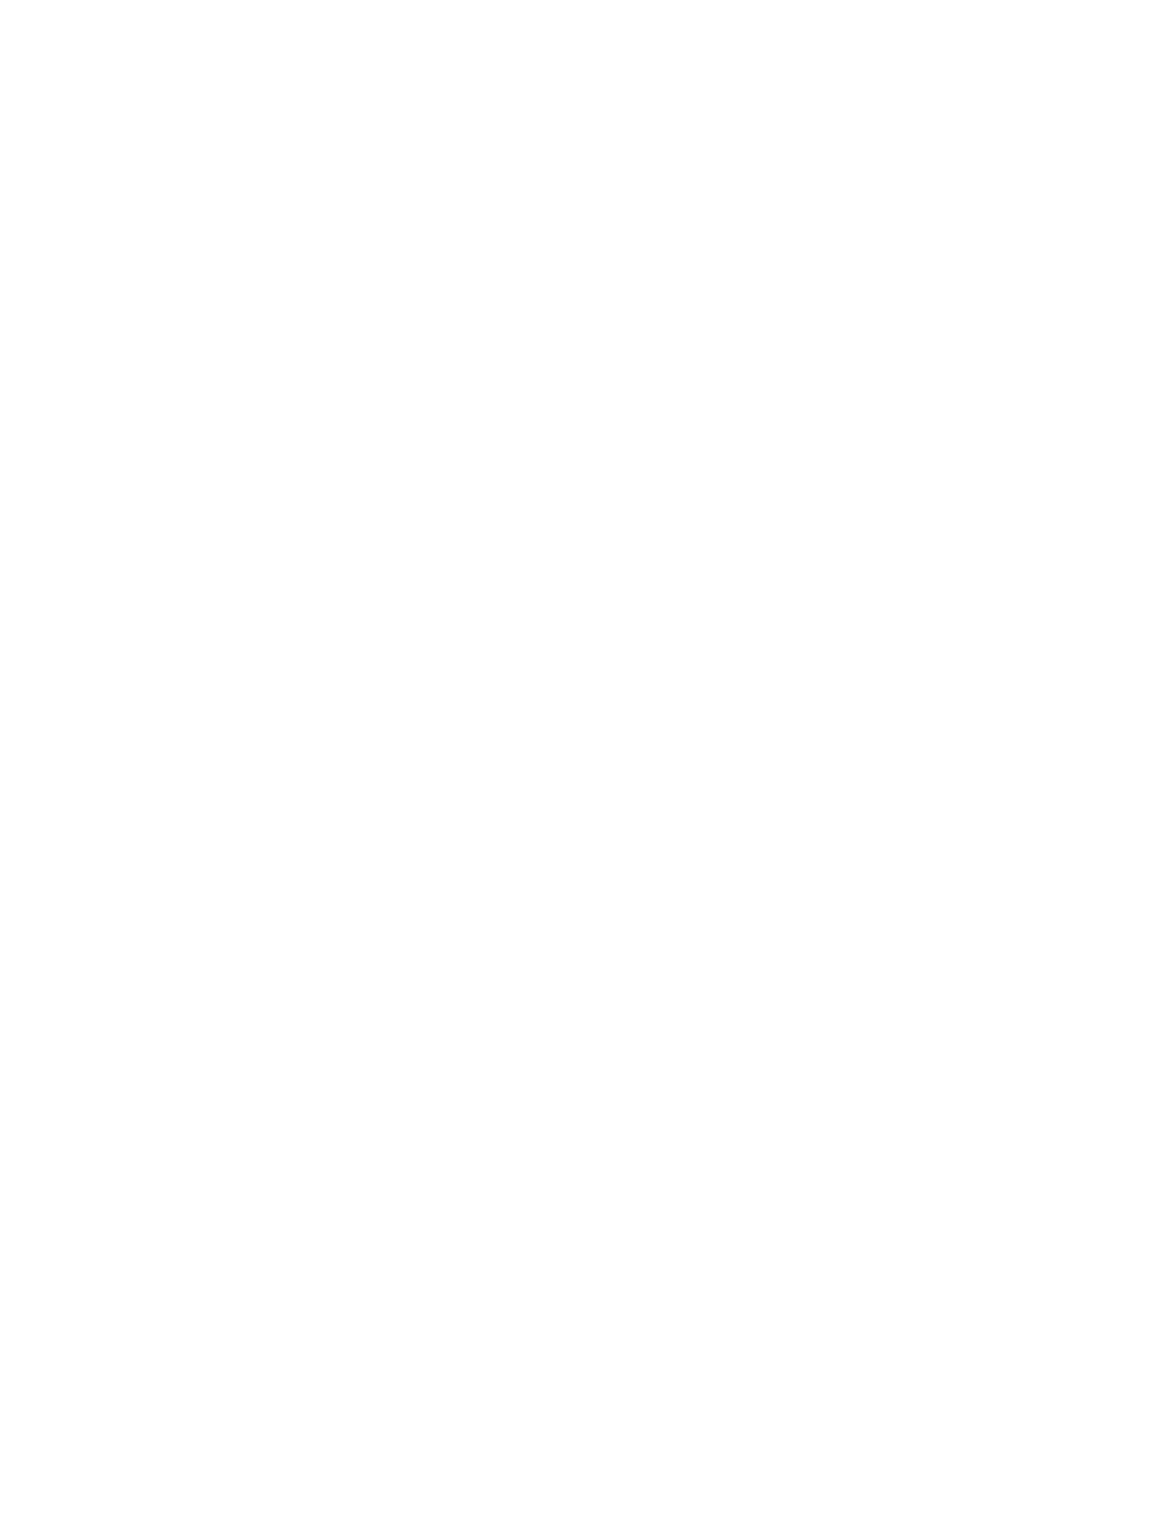 Central Securities logo for dark backgrounds (transparent PNG)